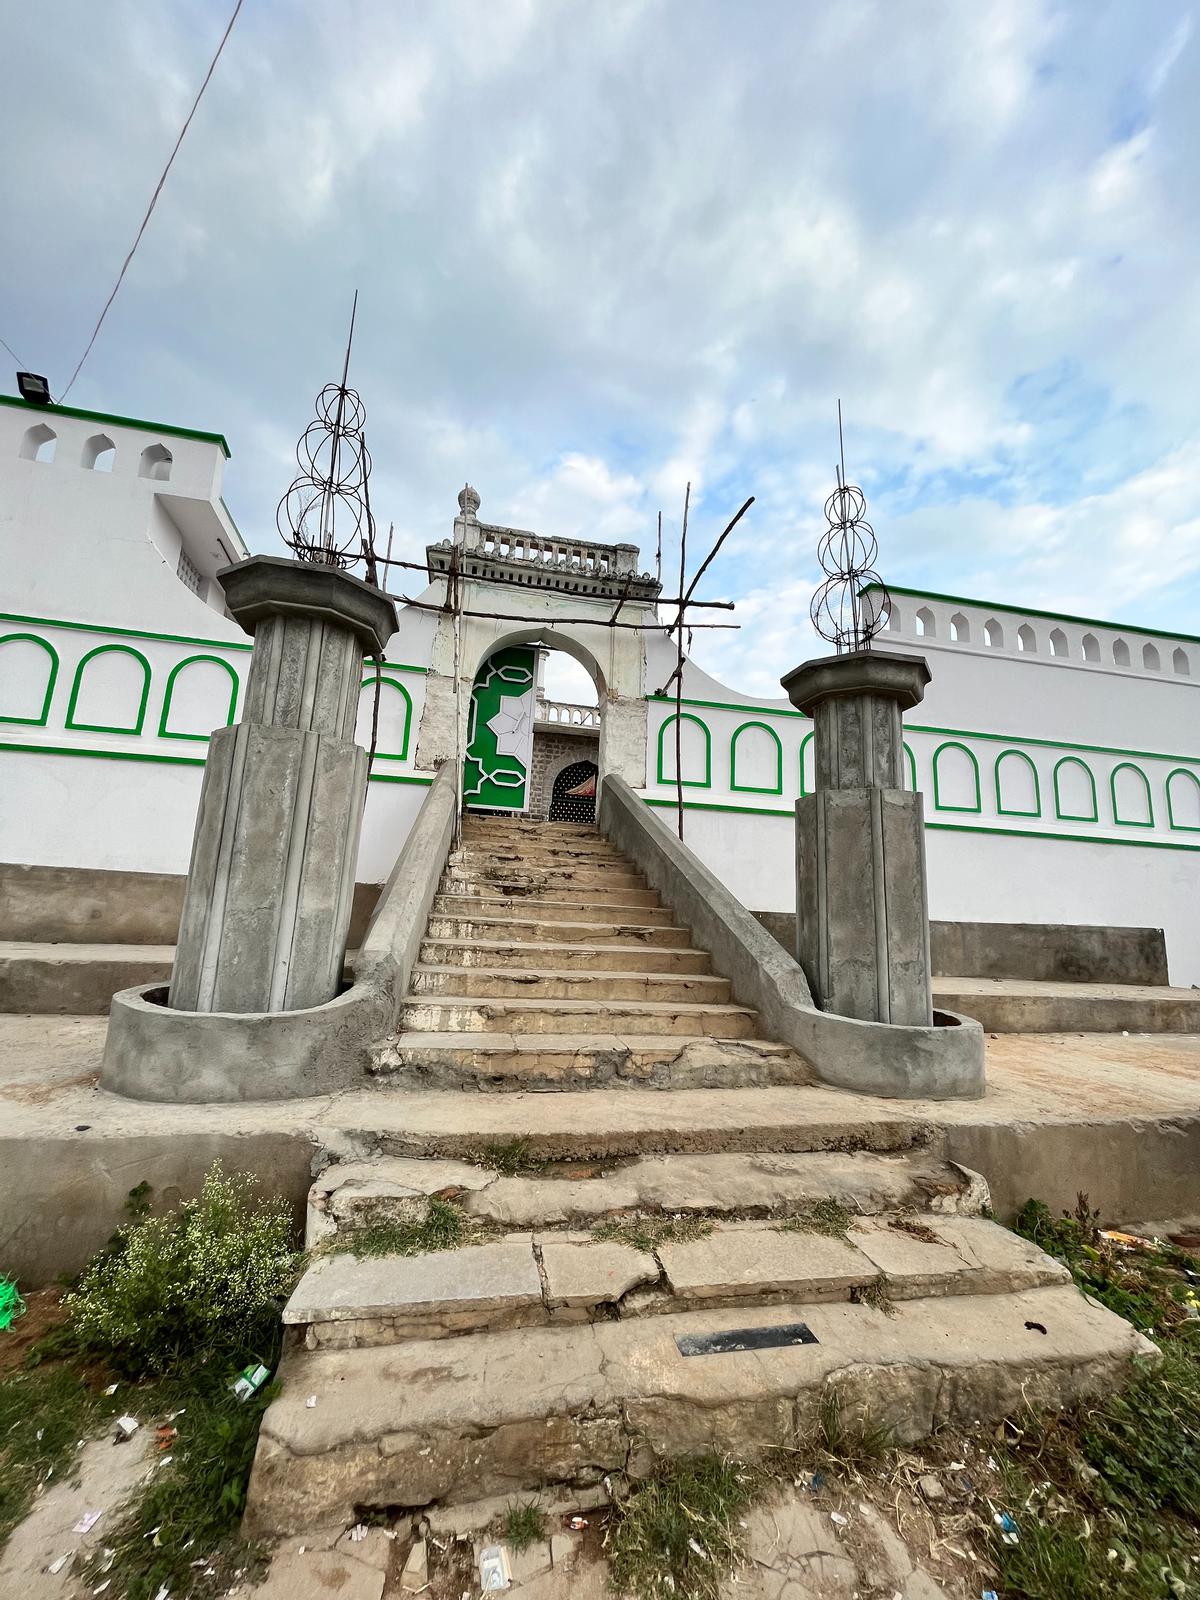 The entrace to the dargah